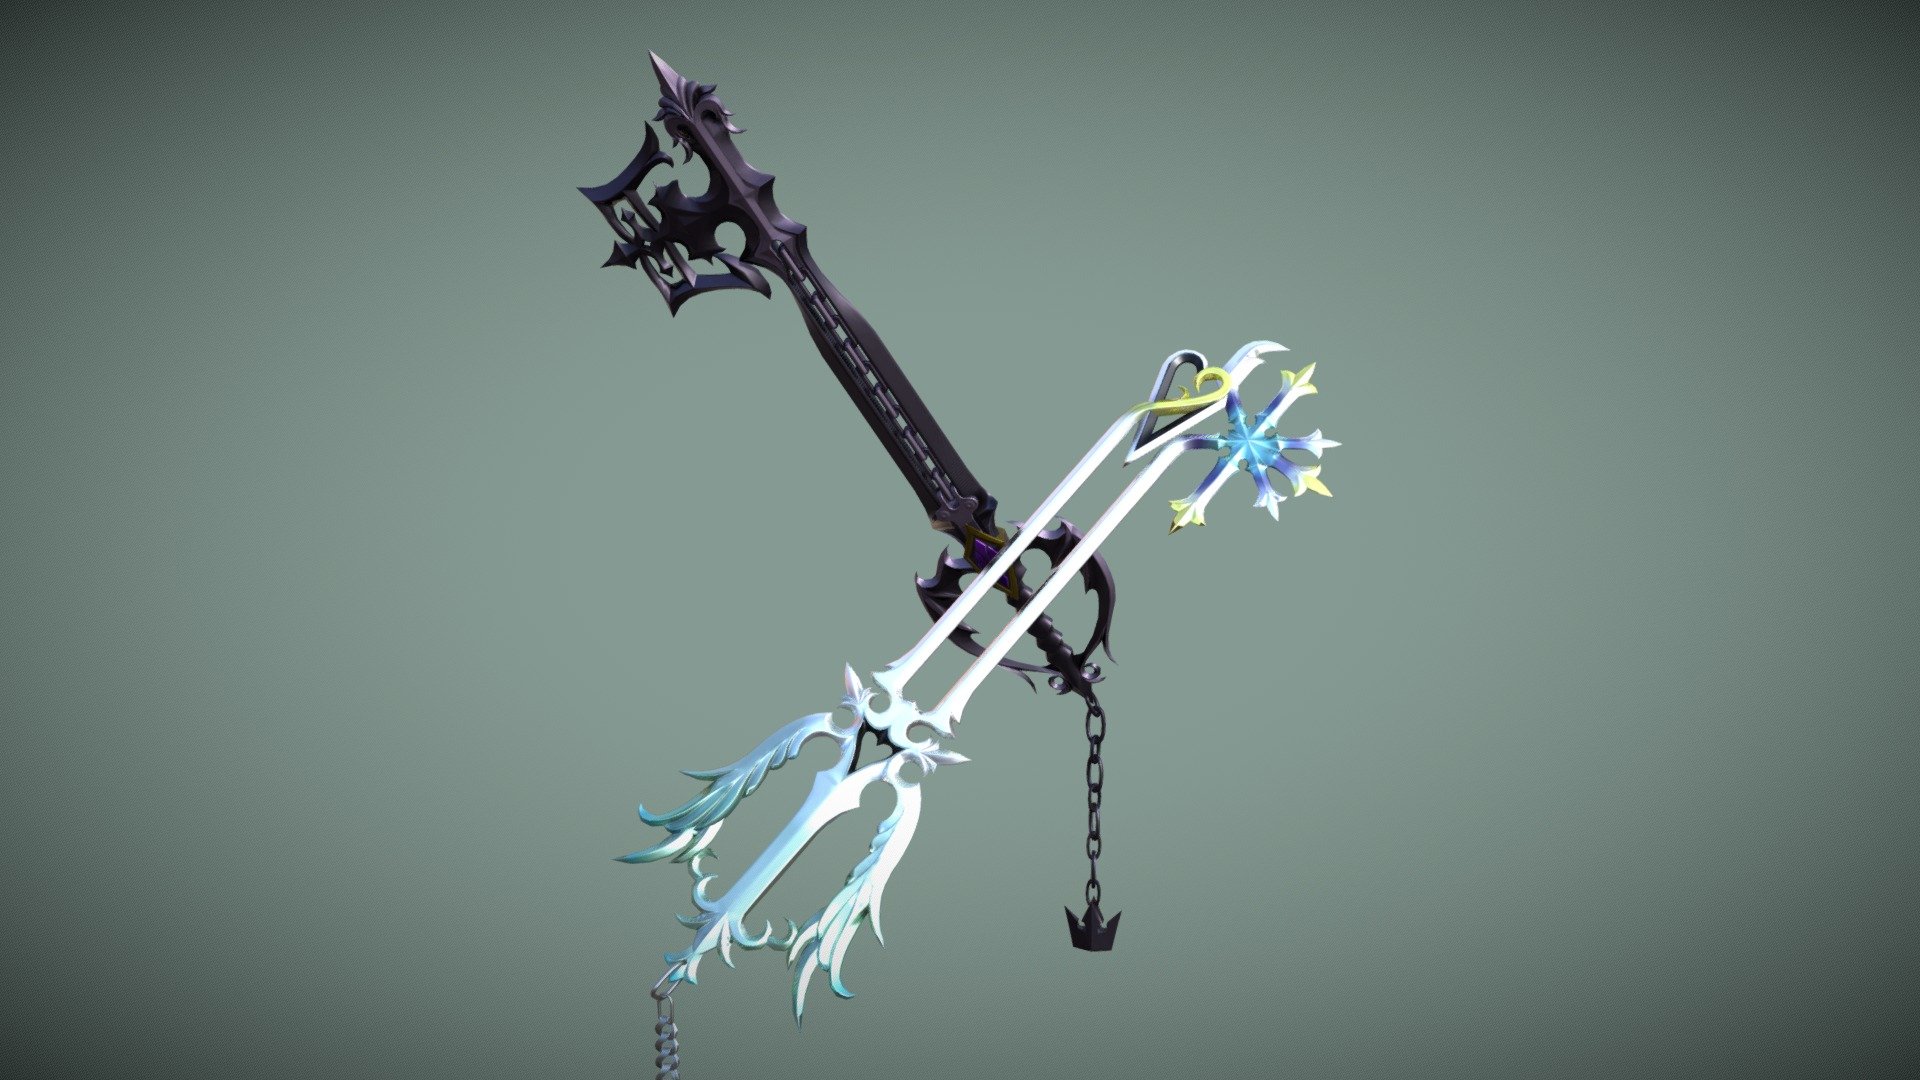 Part of a 3D modelling and mild animation project. These weapons feature in the Kingdom Hearts game series. I’ve had go at constructing them myself, and given them a new coat of paint to give their visual appeal a greater effect, since the in-game models aren’t especially ‘shiny’, like the models you see nowadays.

These iconic keyblades are the Oathkeeper and the Oblivion, each representing the bonds Sora has with Kairi and Riku respectively, but are better known for being used by Roxas, Sora's nobody, in his fights against Sora, Riku and Axel. Their combined power can enhance and prolong the user's combat drive, and can banish dark foes with the power of light

This is a piece of fan art for the Kingdom Hearts Series. Only the mesh and used maps you see here were created by me. All other credit goes to Square Enix and Tetsuya Nomura 3d model